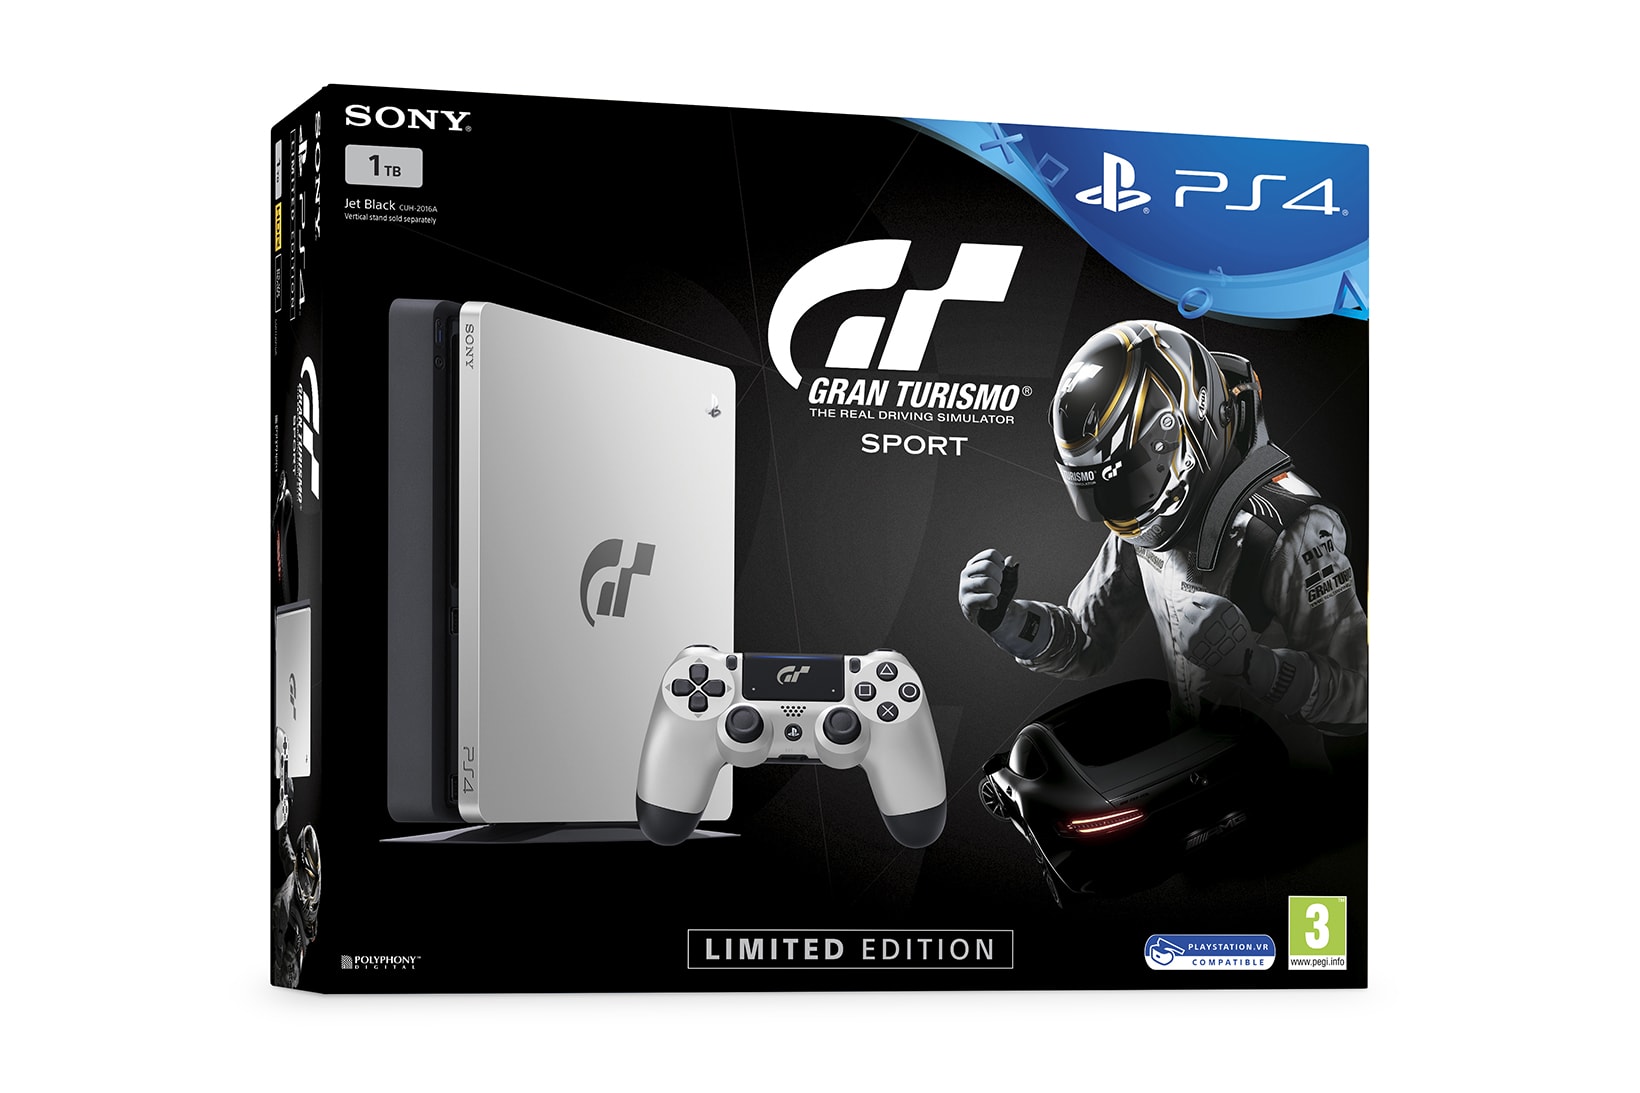 Gran Turismo Sport PlayStation 4 Limited Edition Bundle Sony Console Black Silver 2017 Release Date Info